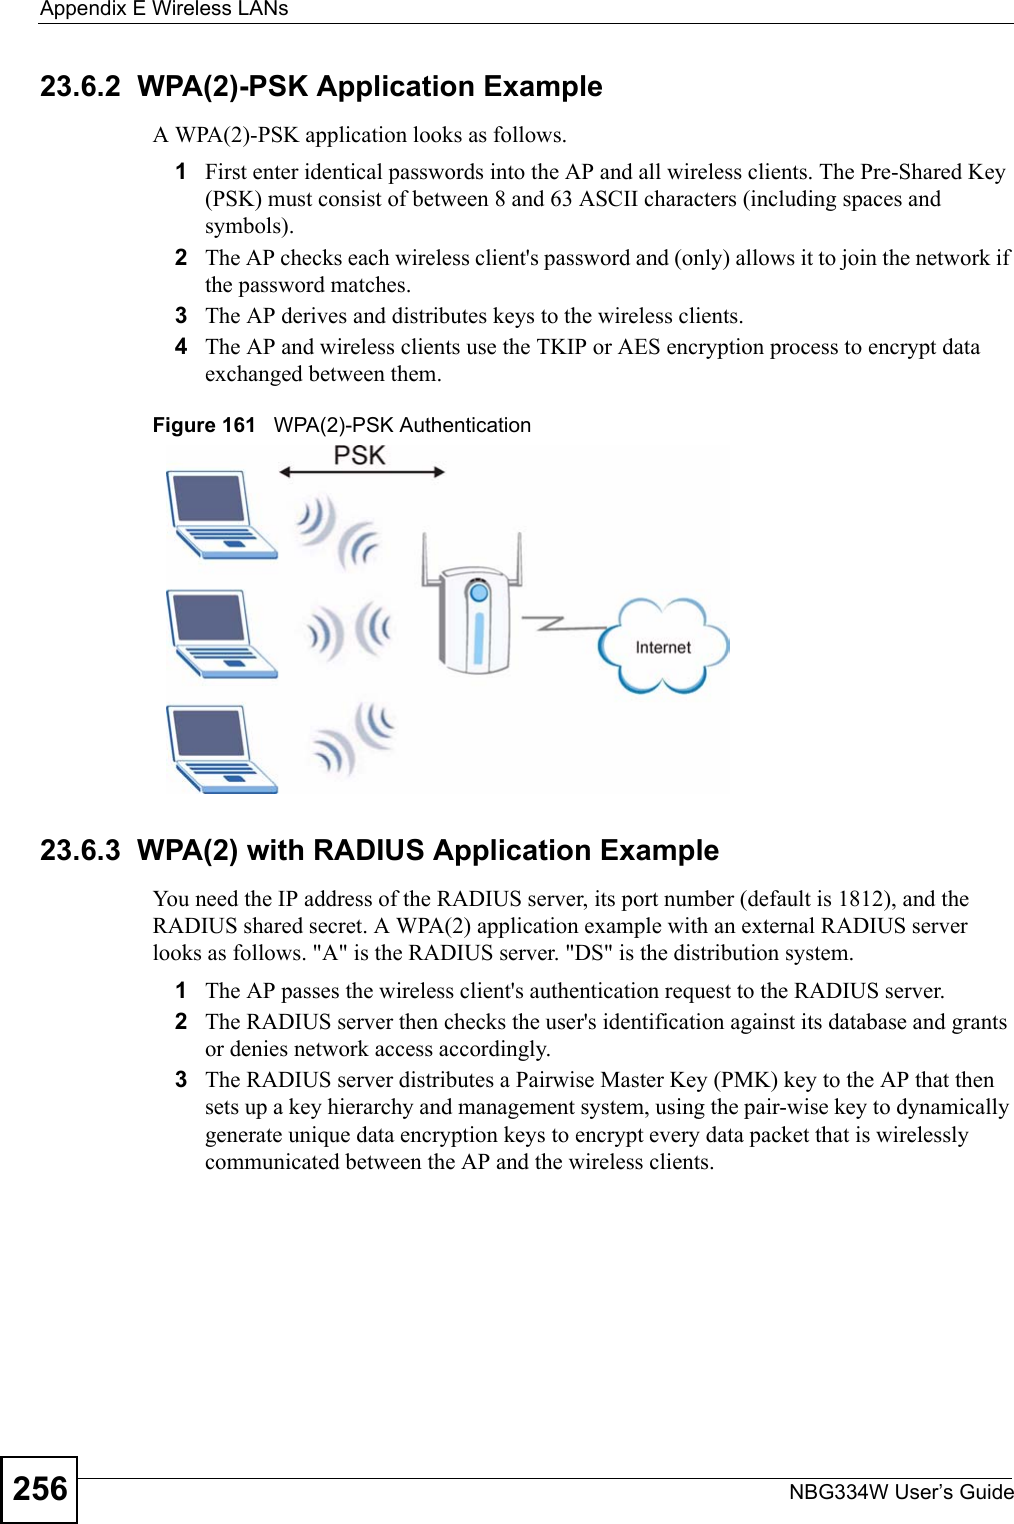 Appendix E Wireless LANsNBG334W User’s Guide25623.6.2  WPA(2)-PSK Application ExampleA WPA(2)-PSK application looks as follows.1First enter identical passwords into the AP and all wireless clients. The Pre-Shared Key (PSK) must consist of between 8 and 63 ASCII characters (including spaces and symbols).2The AP checks each wireless client&apos;s password and (only) allows it to join the network if the password matches.3The AP derives and distributes keys to the wireless clients.4The AP and wireless clients use the TKIP or AES encryption process to encrypt data exchanged between them.Figure 161   WPA(2)-PSK Authentication23.6.3  WPA(2) with RADIUS Application ExampleYou need the IP address of the RADIUS server, its port number (default is 1812), and the RADIUS shared secret. A WPA(2) application example with an external RADIUS server looks as follows. &quot;A&quot; is the RADIUS server. &quot;DS&quot; is the distribution system.1The AP passes the wireless client&apos;s authentication request to the RADIUS server.2The RADIUS server then checks the user&apos;s identification against its database and grants or denies network access accordingly.3The RADIUS server distributes a Pairwise Master Key (PMK) key to the AP that then sets up a key hierarchy and management system, using the pair-wise key to dynamically generate unique data encryption keys to encrypt every data packet that is wirelessly communicated between the AP and the wireless clients. 